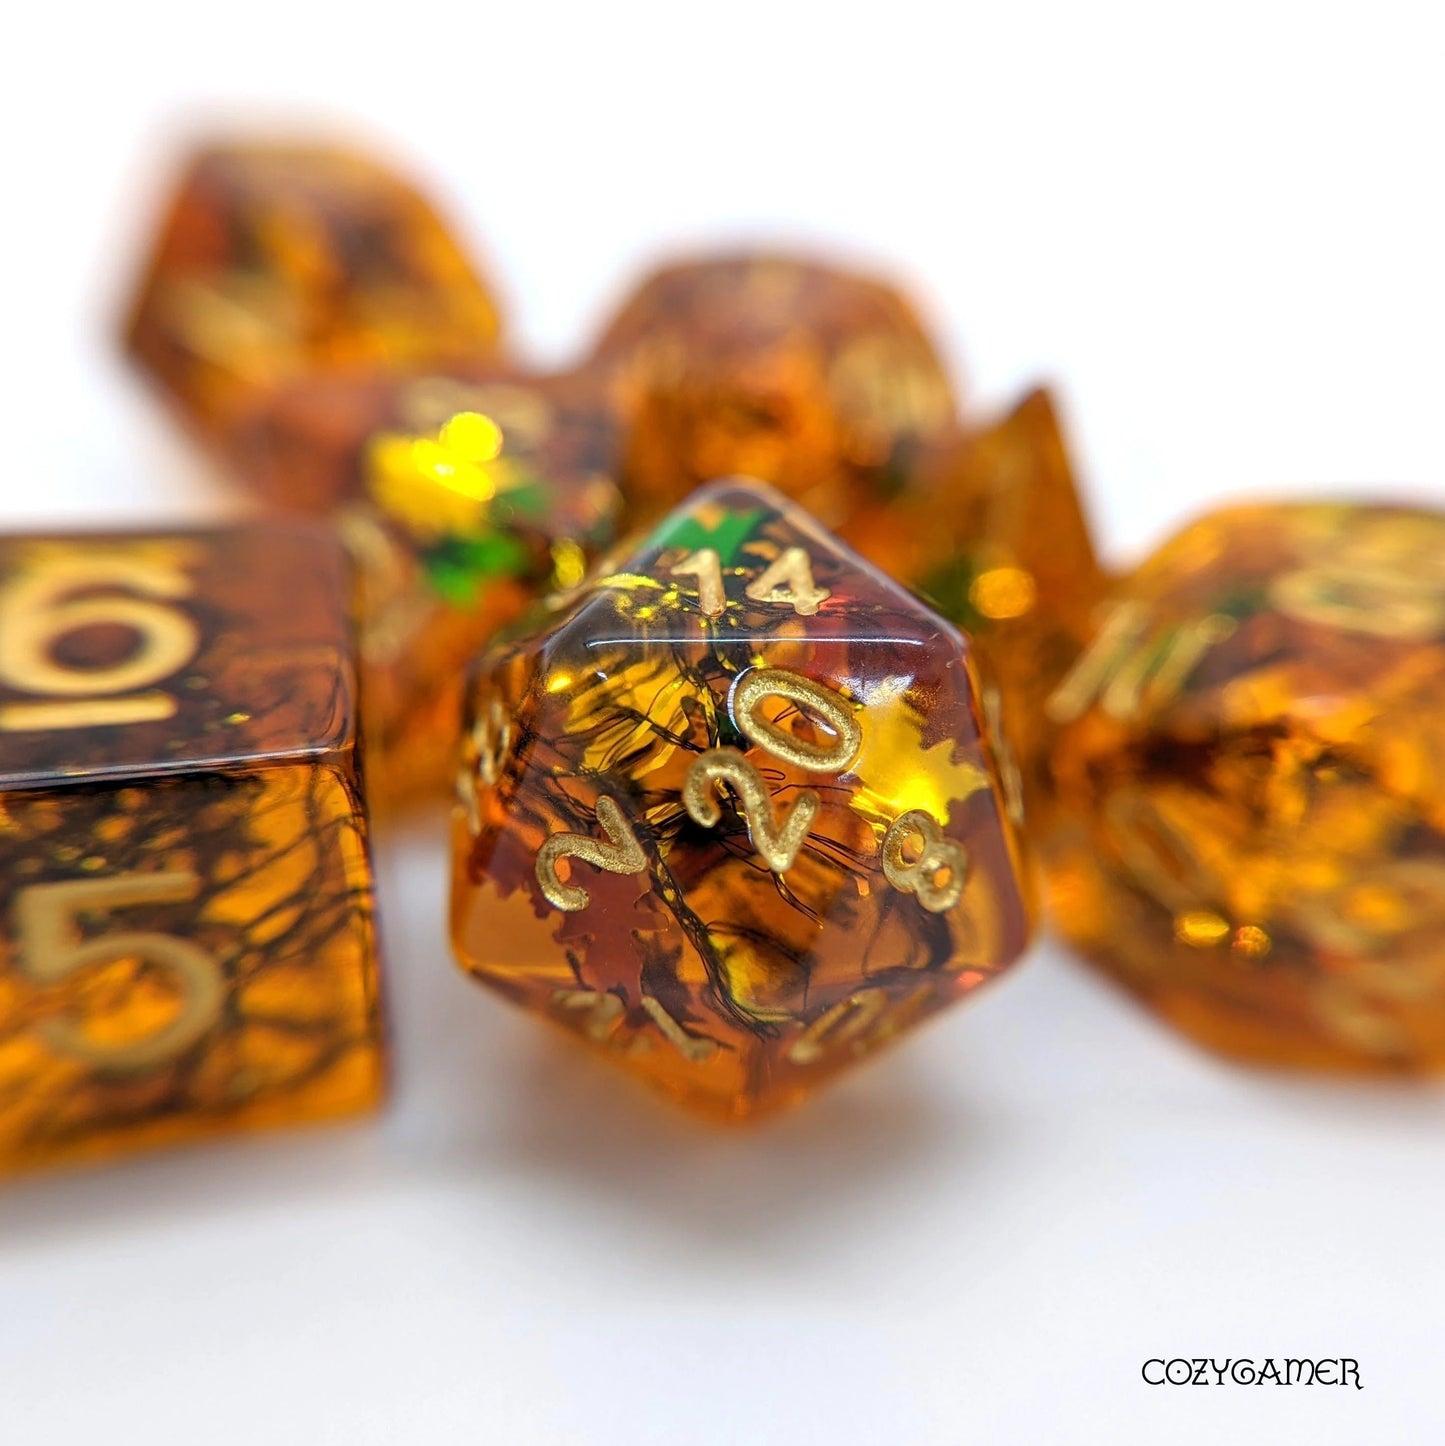 Falling Leaves - 7 Dice Set - The Fourth Place